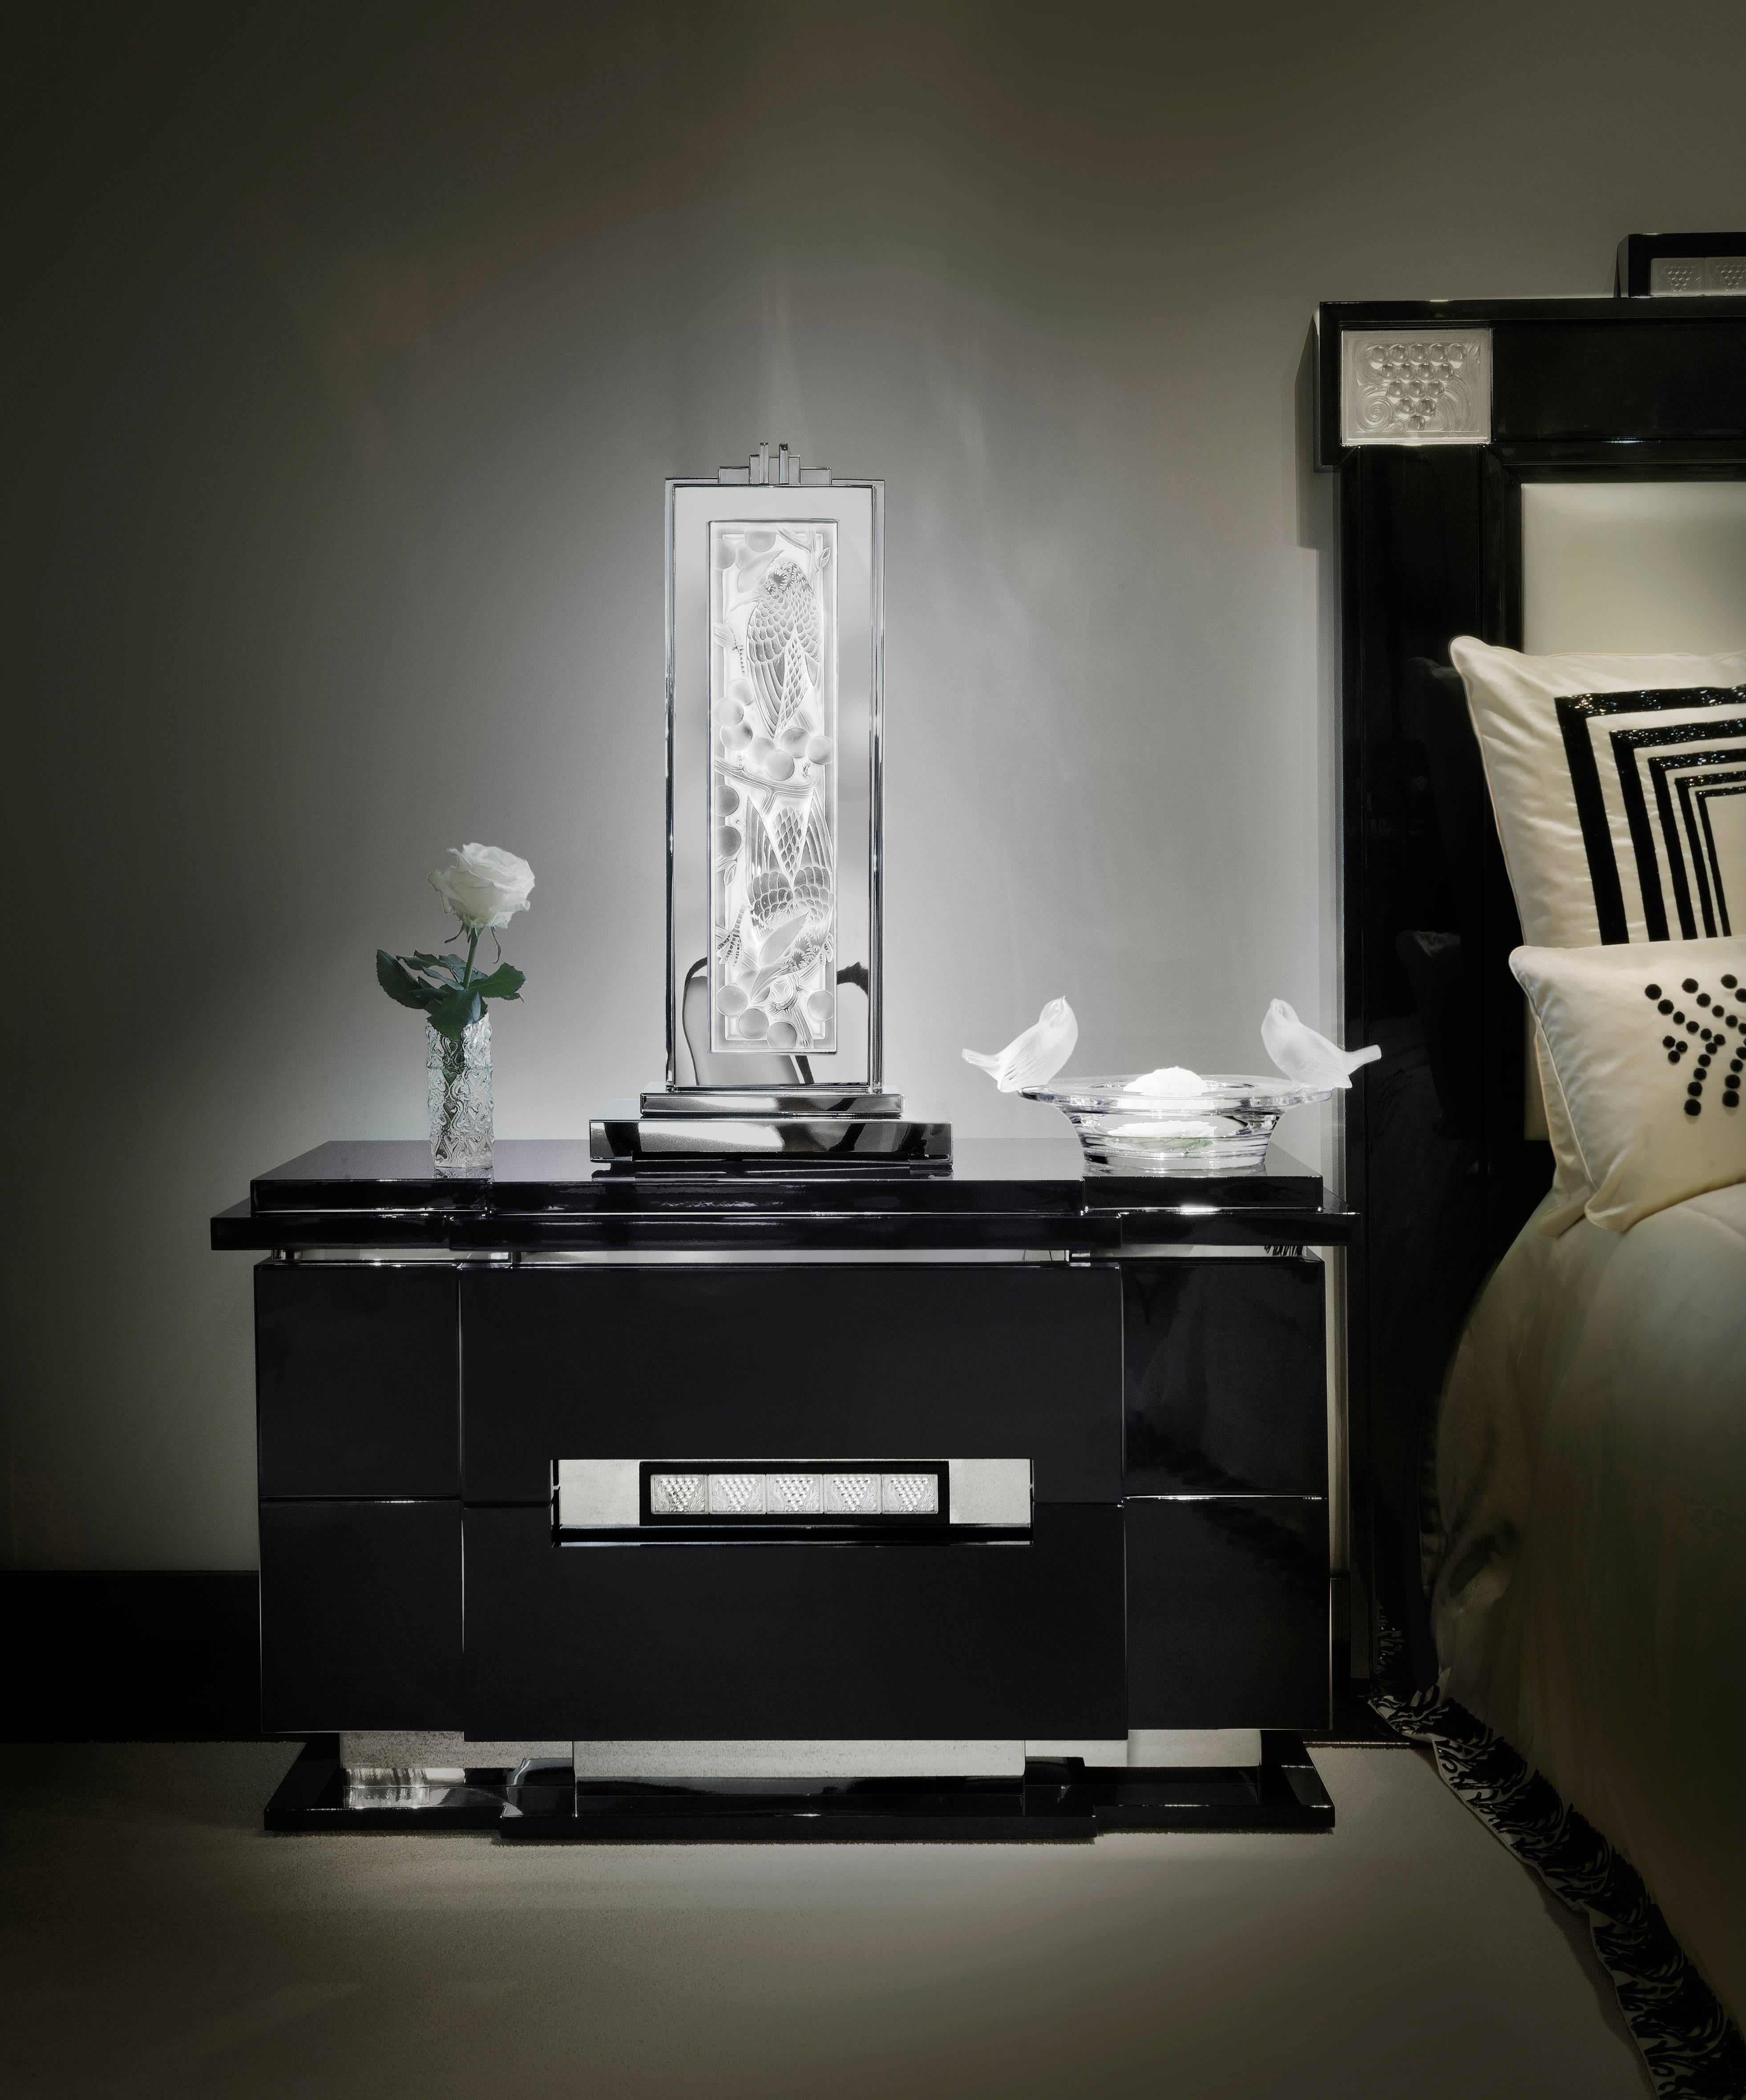 Recalling Bacchus, god of wine, vegetation and pleasure, the Raisins motif at adorns the iconic panel evokes the art of fine living. The Classic panel accents the raisins bedside table. 

Numbered edition, clear crystal, black lacquered, large